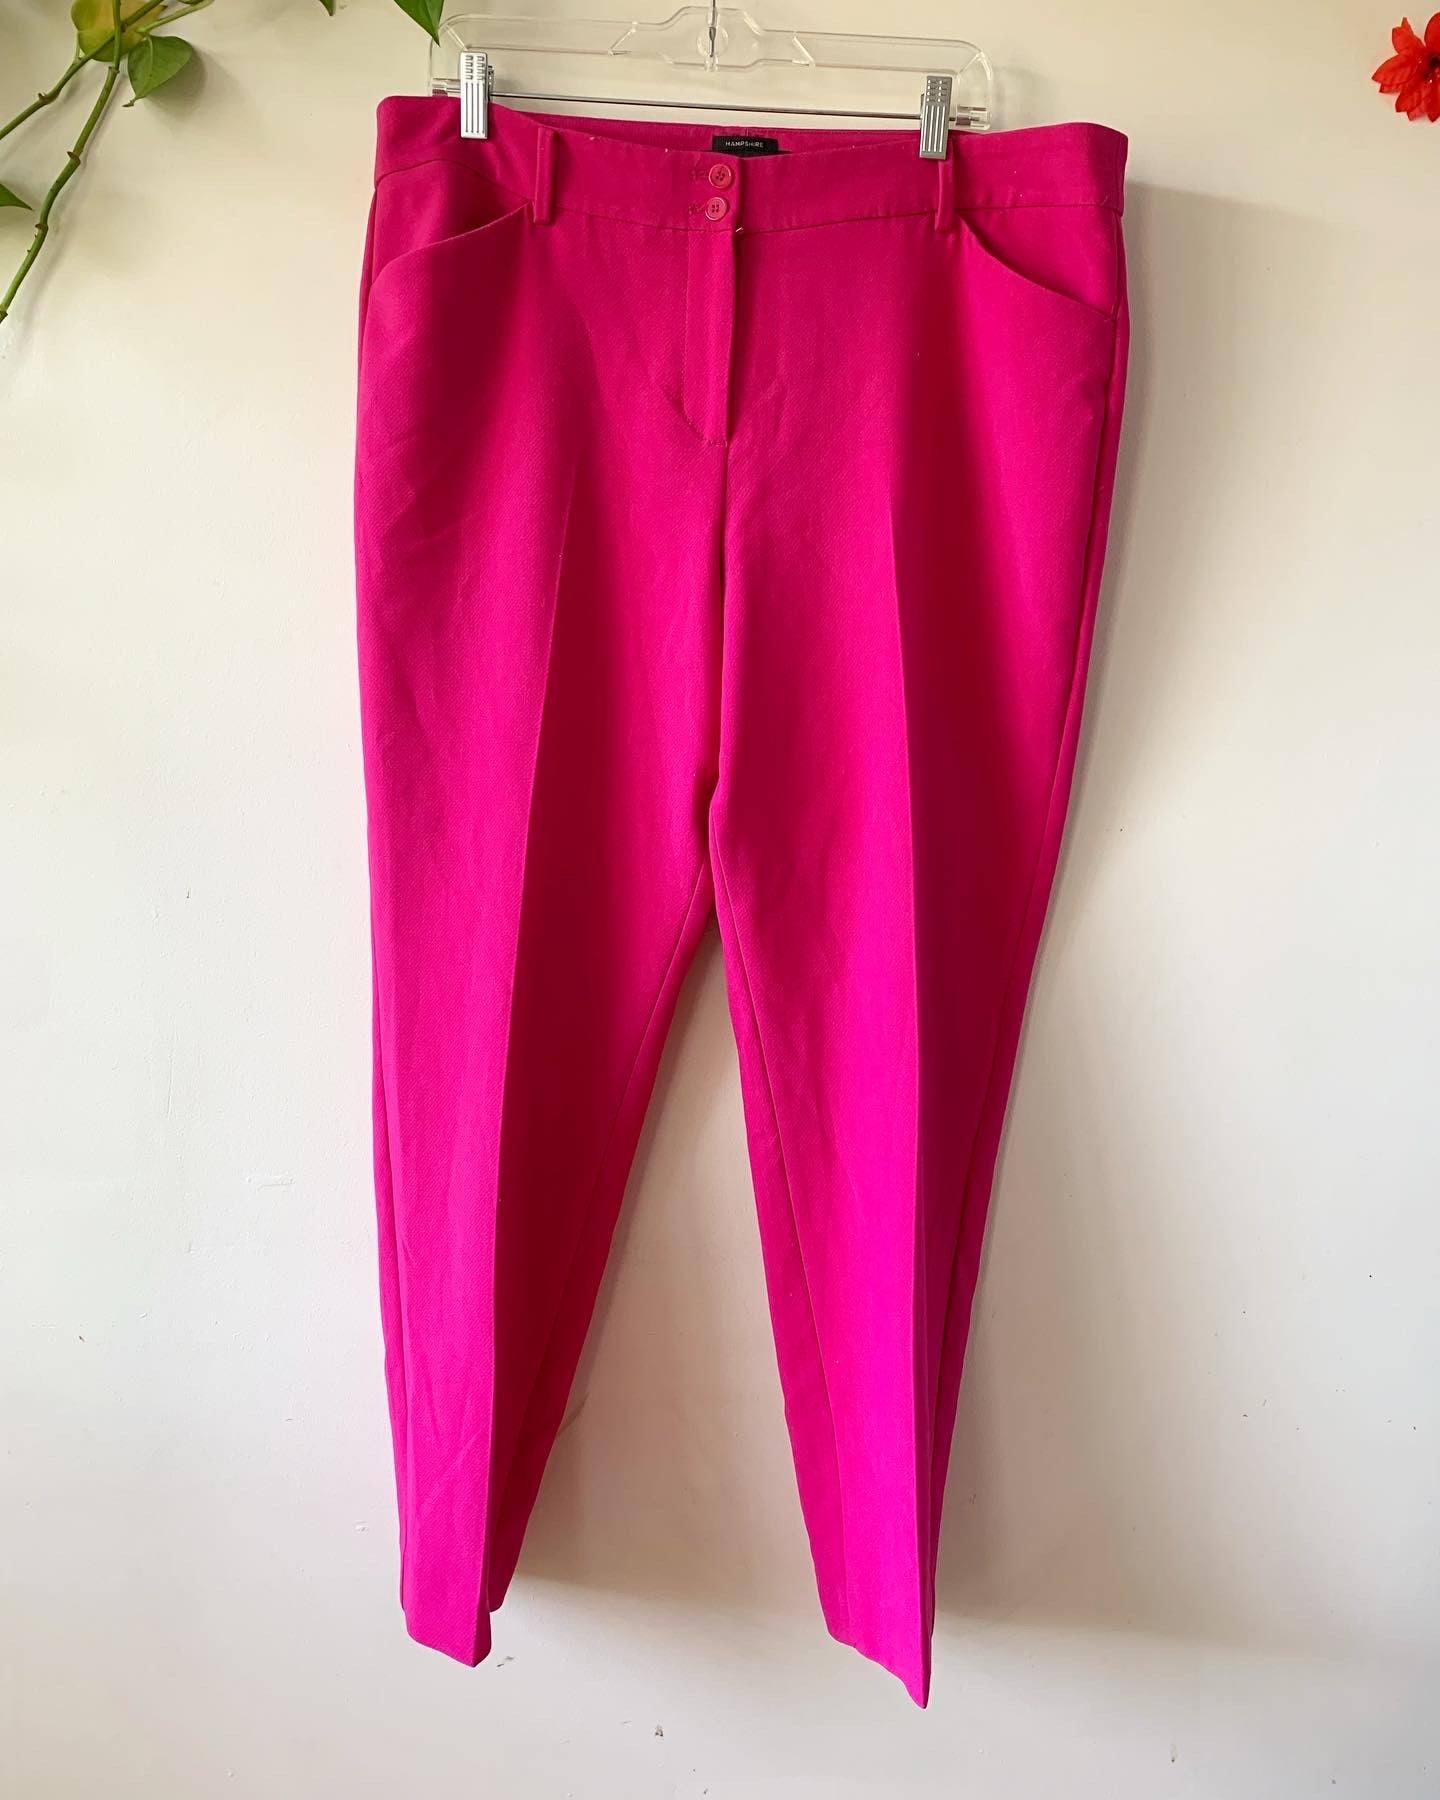 Talbots Hampshire Hot Pink Ankle Twill Pants, Size 16